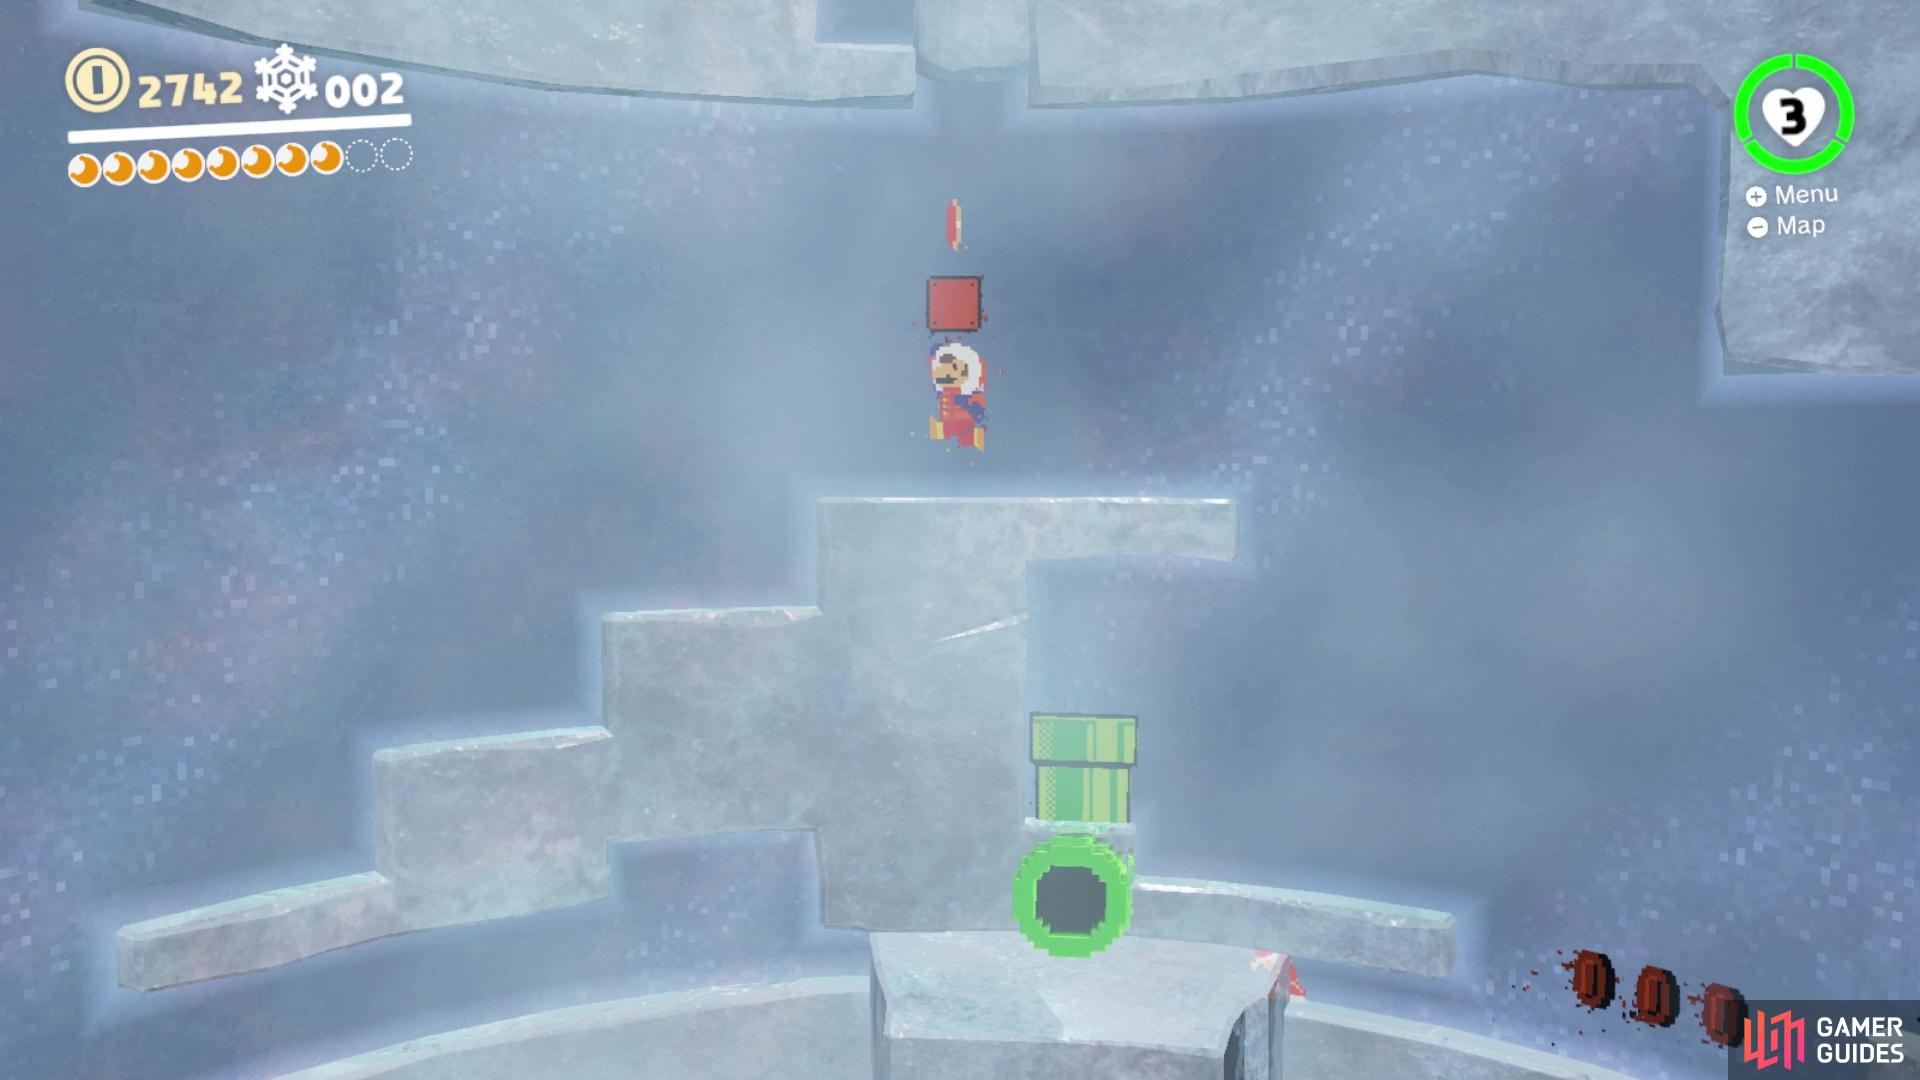 Jump up at this spot to find hidden coin blocks